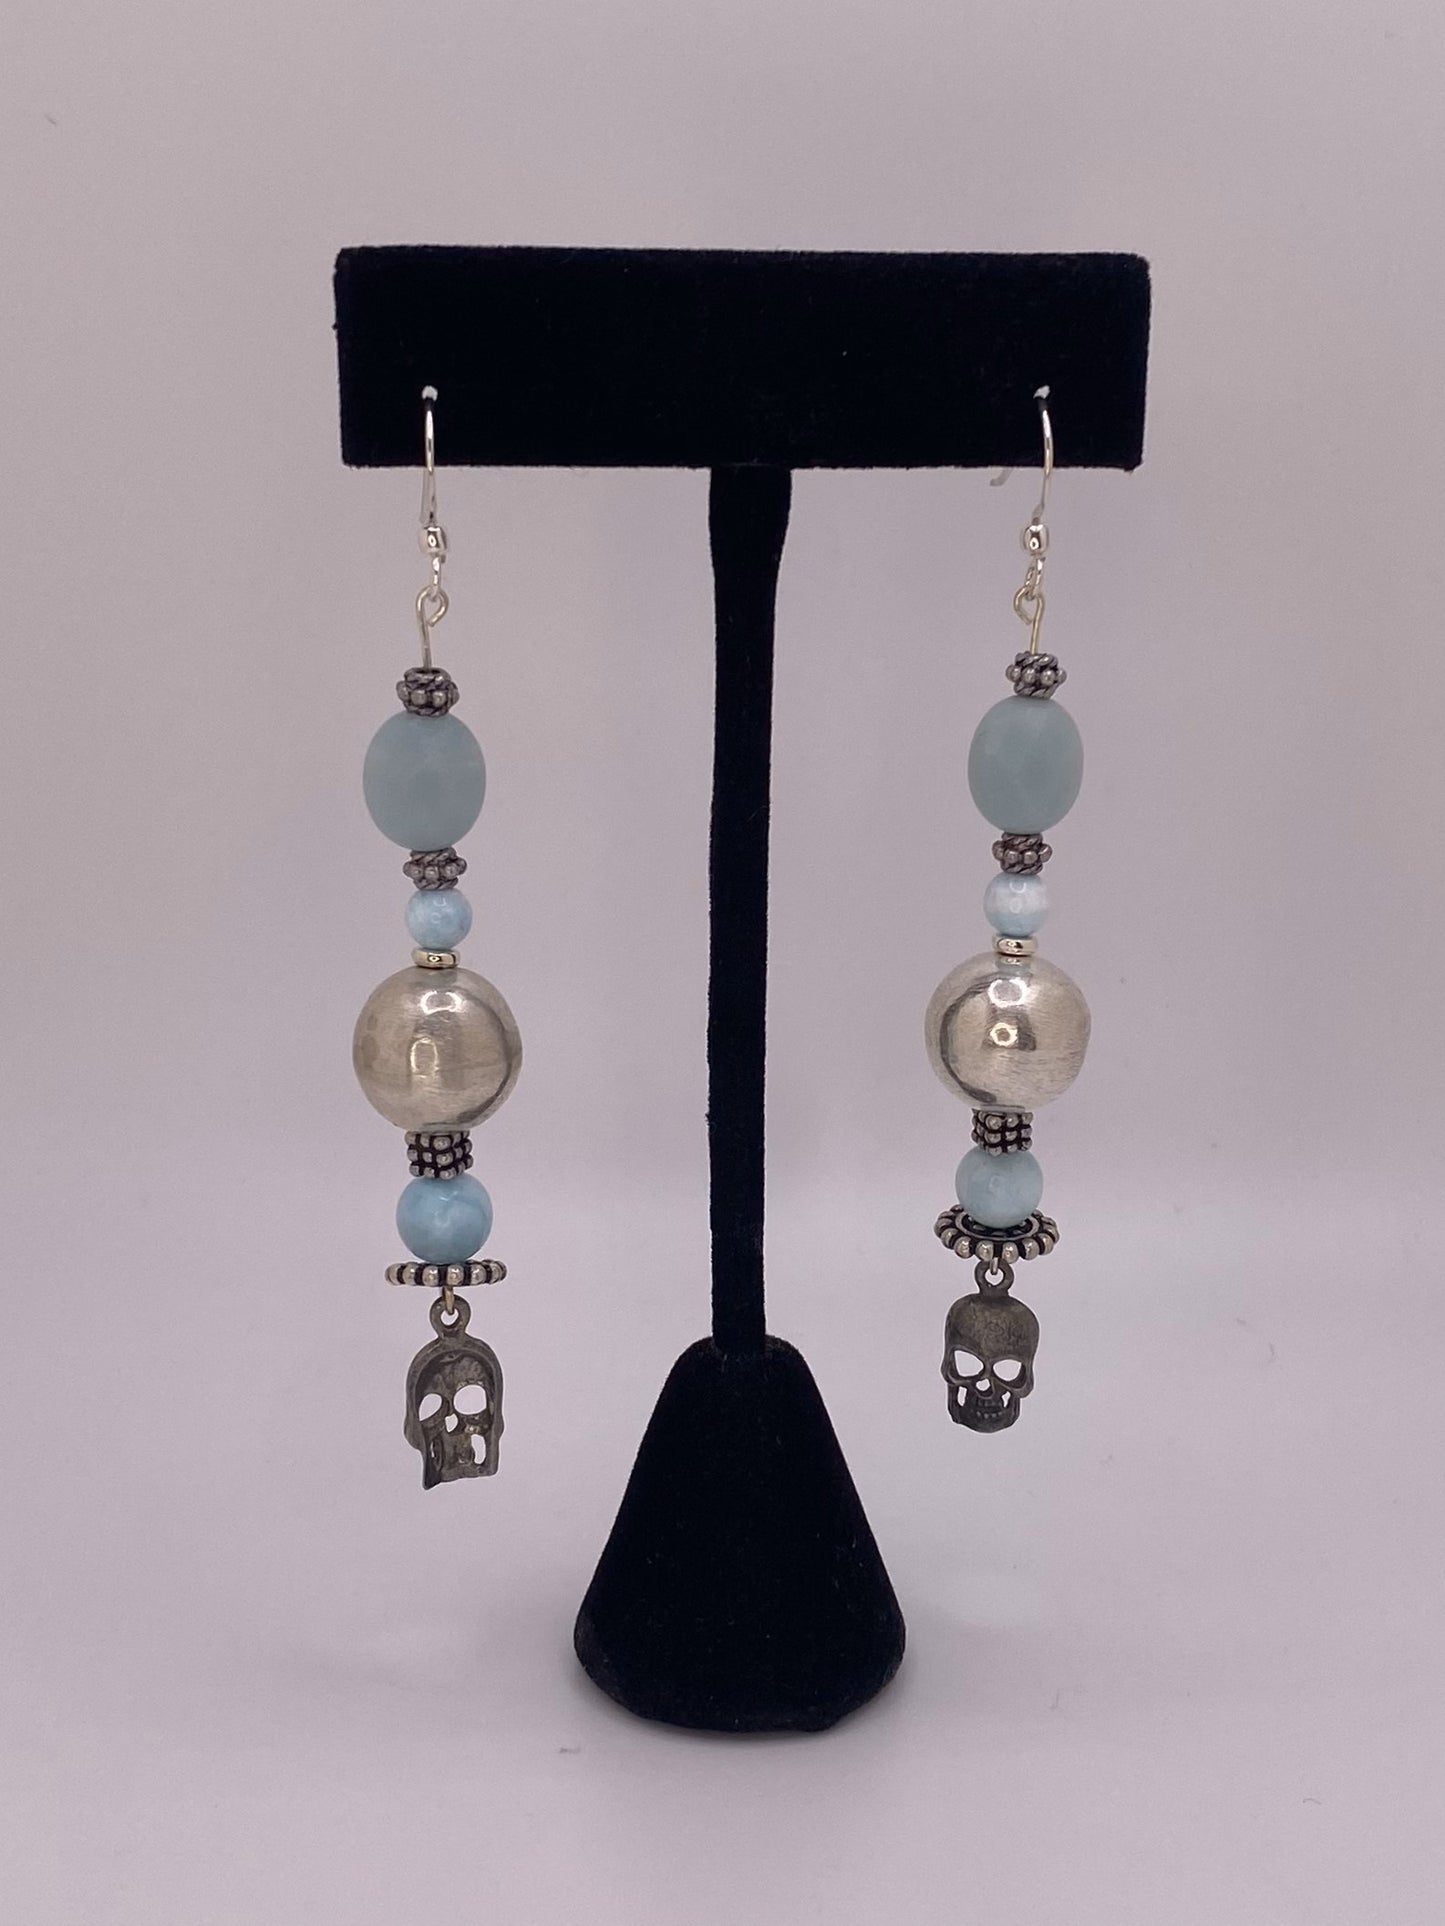 Sterling Silver Earrings with Handmade Round Hollow Silver Bead Aquamarine Larimar and Skull Pendants